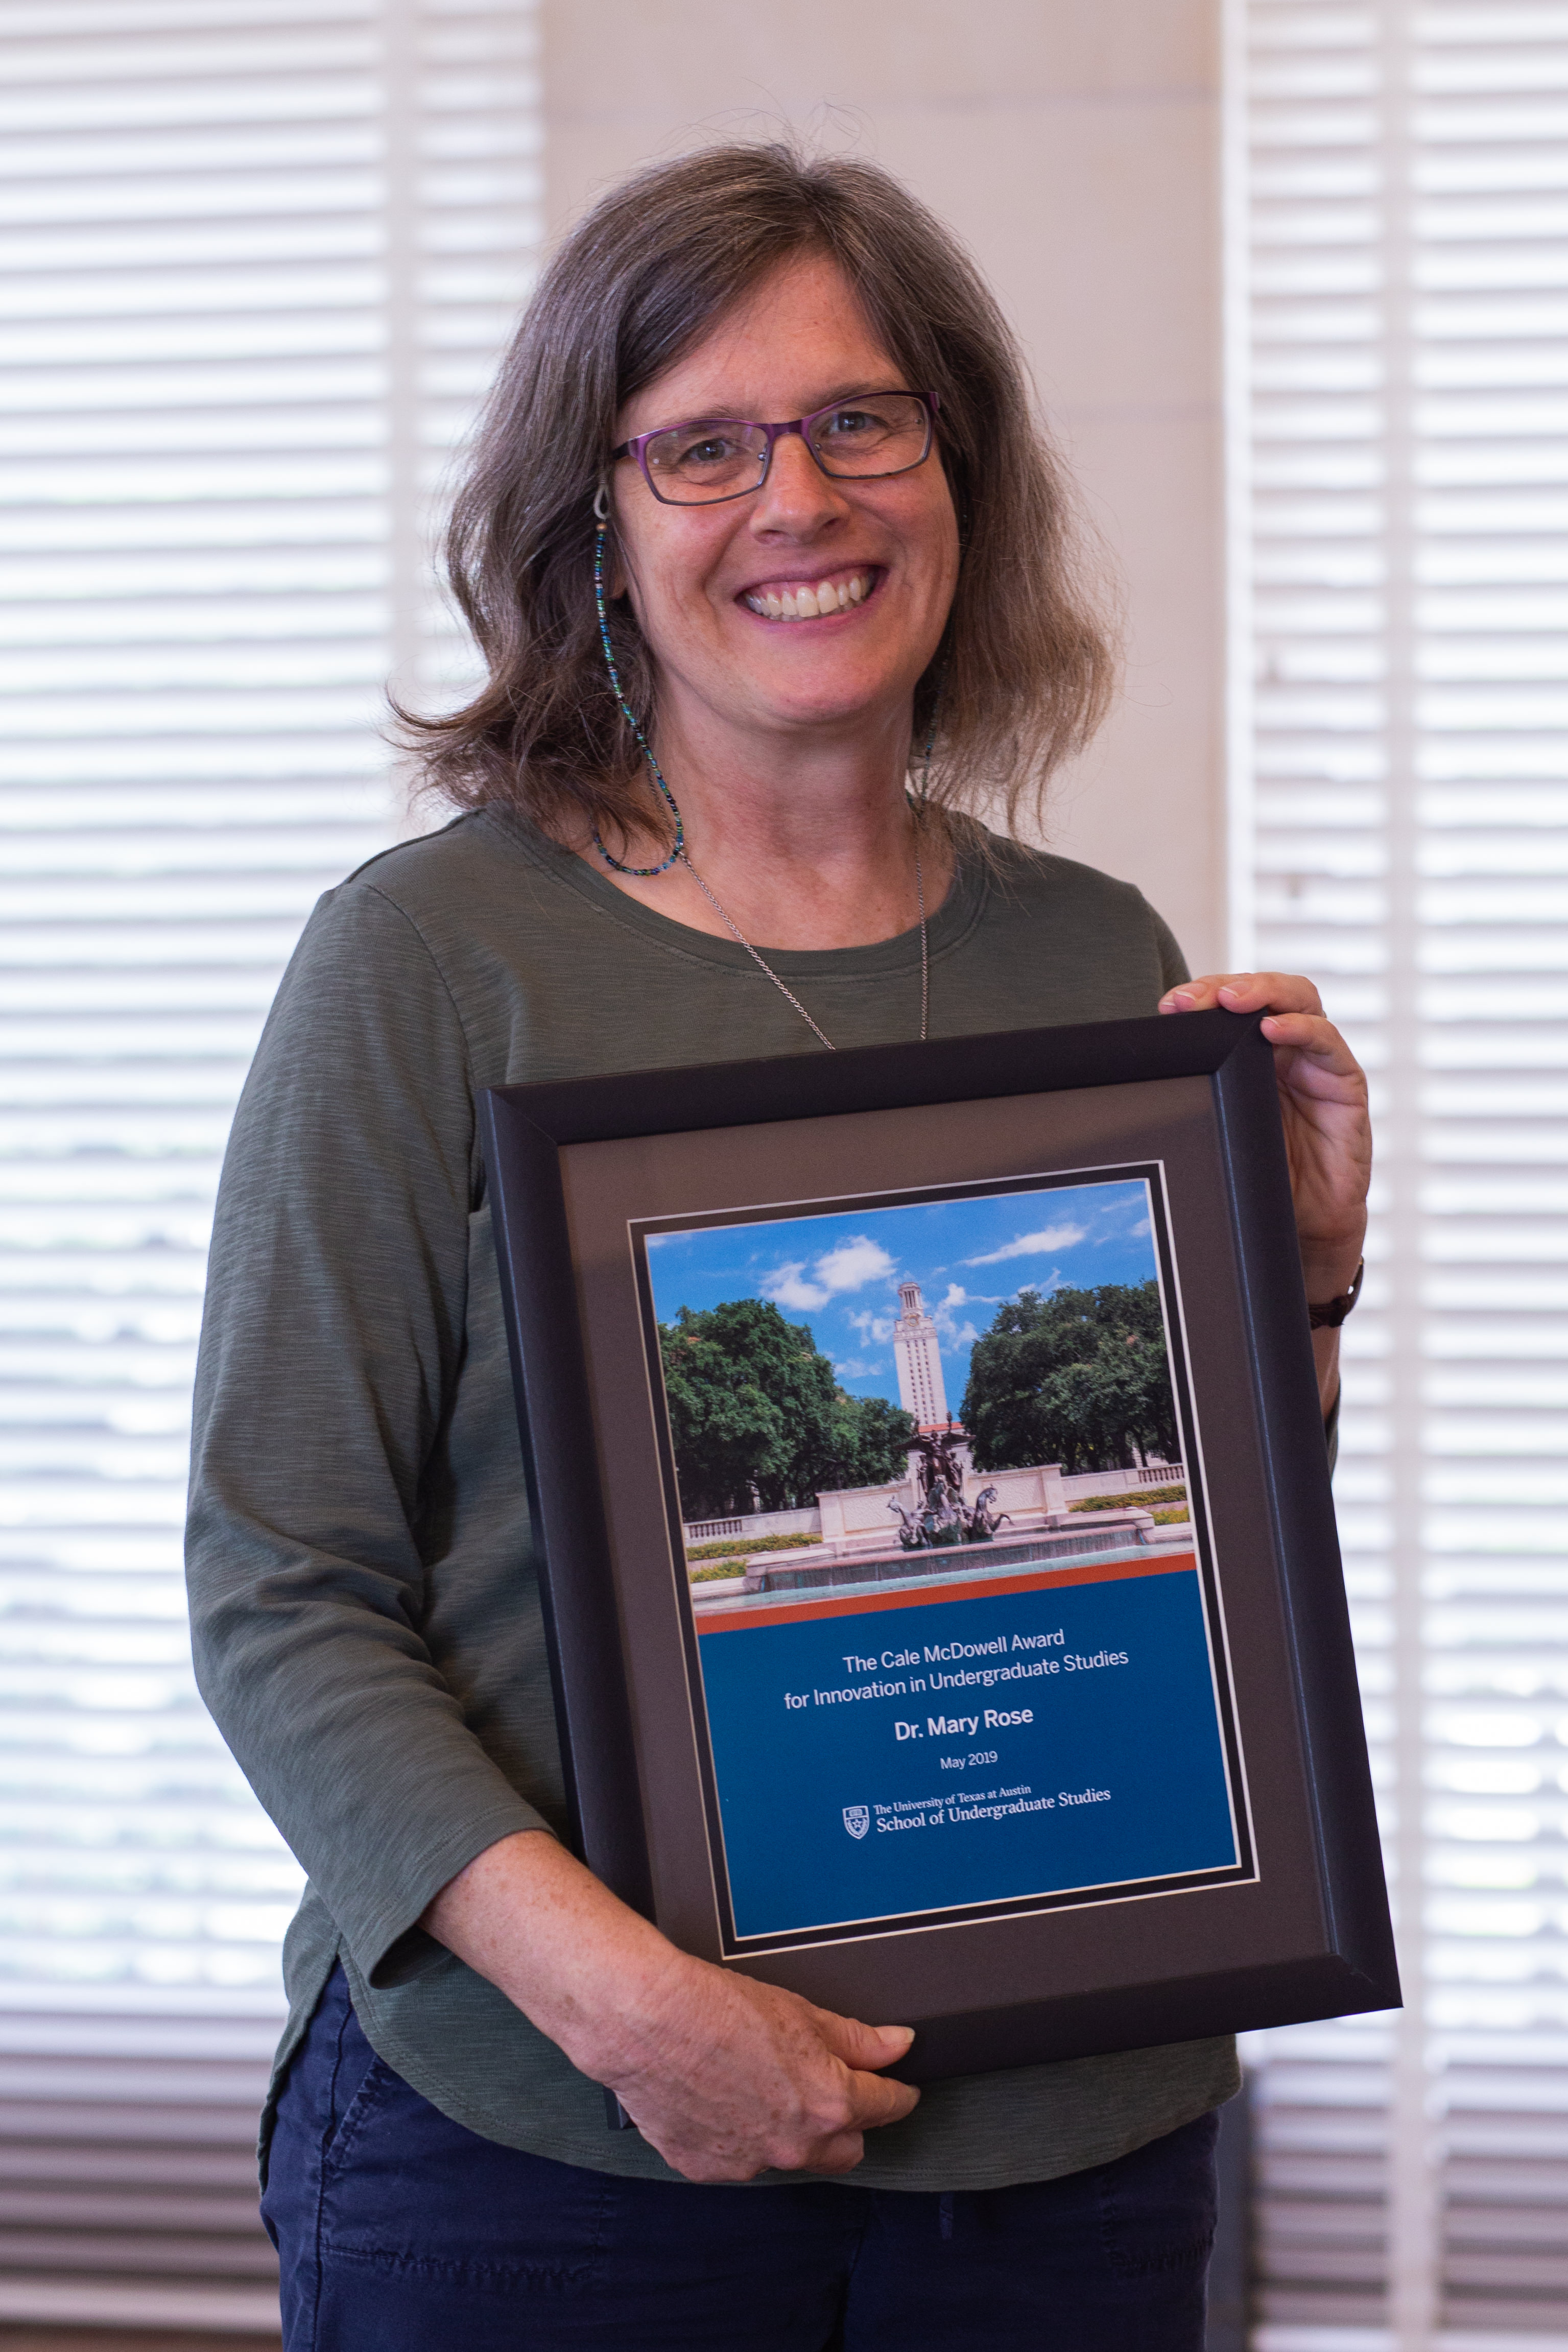 Dr. Mary Rose with her award